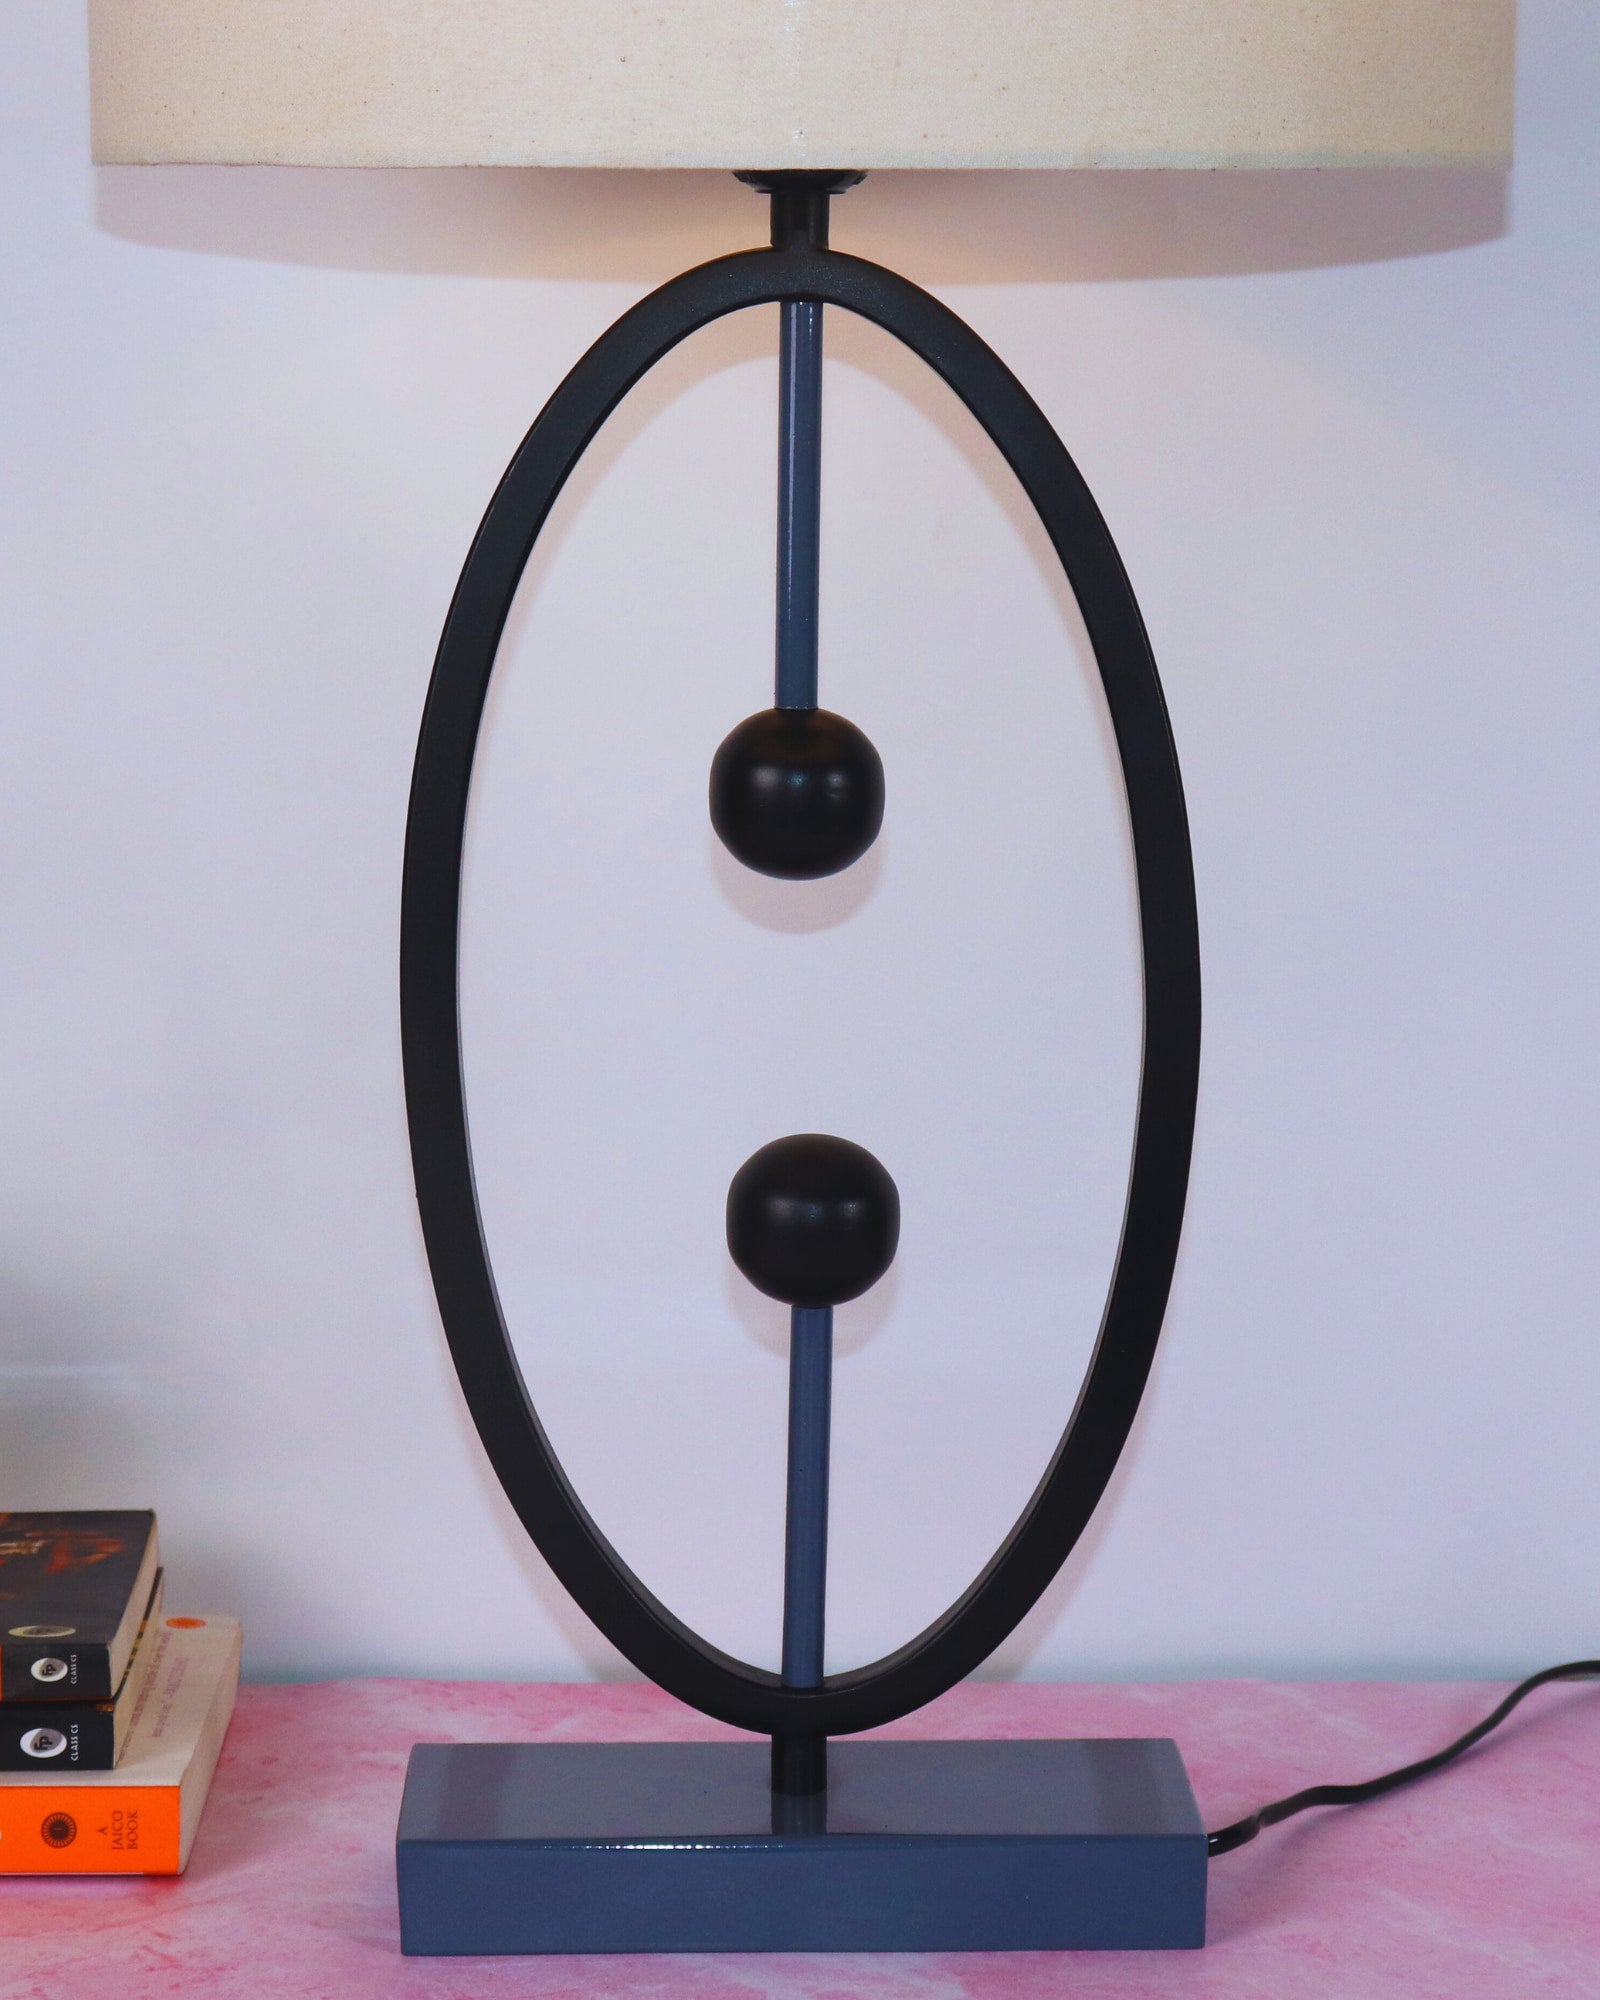 The OvalSky Table lamp